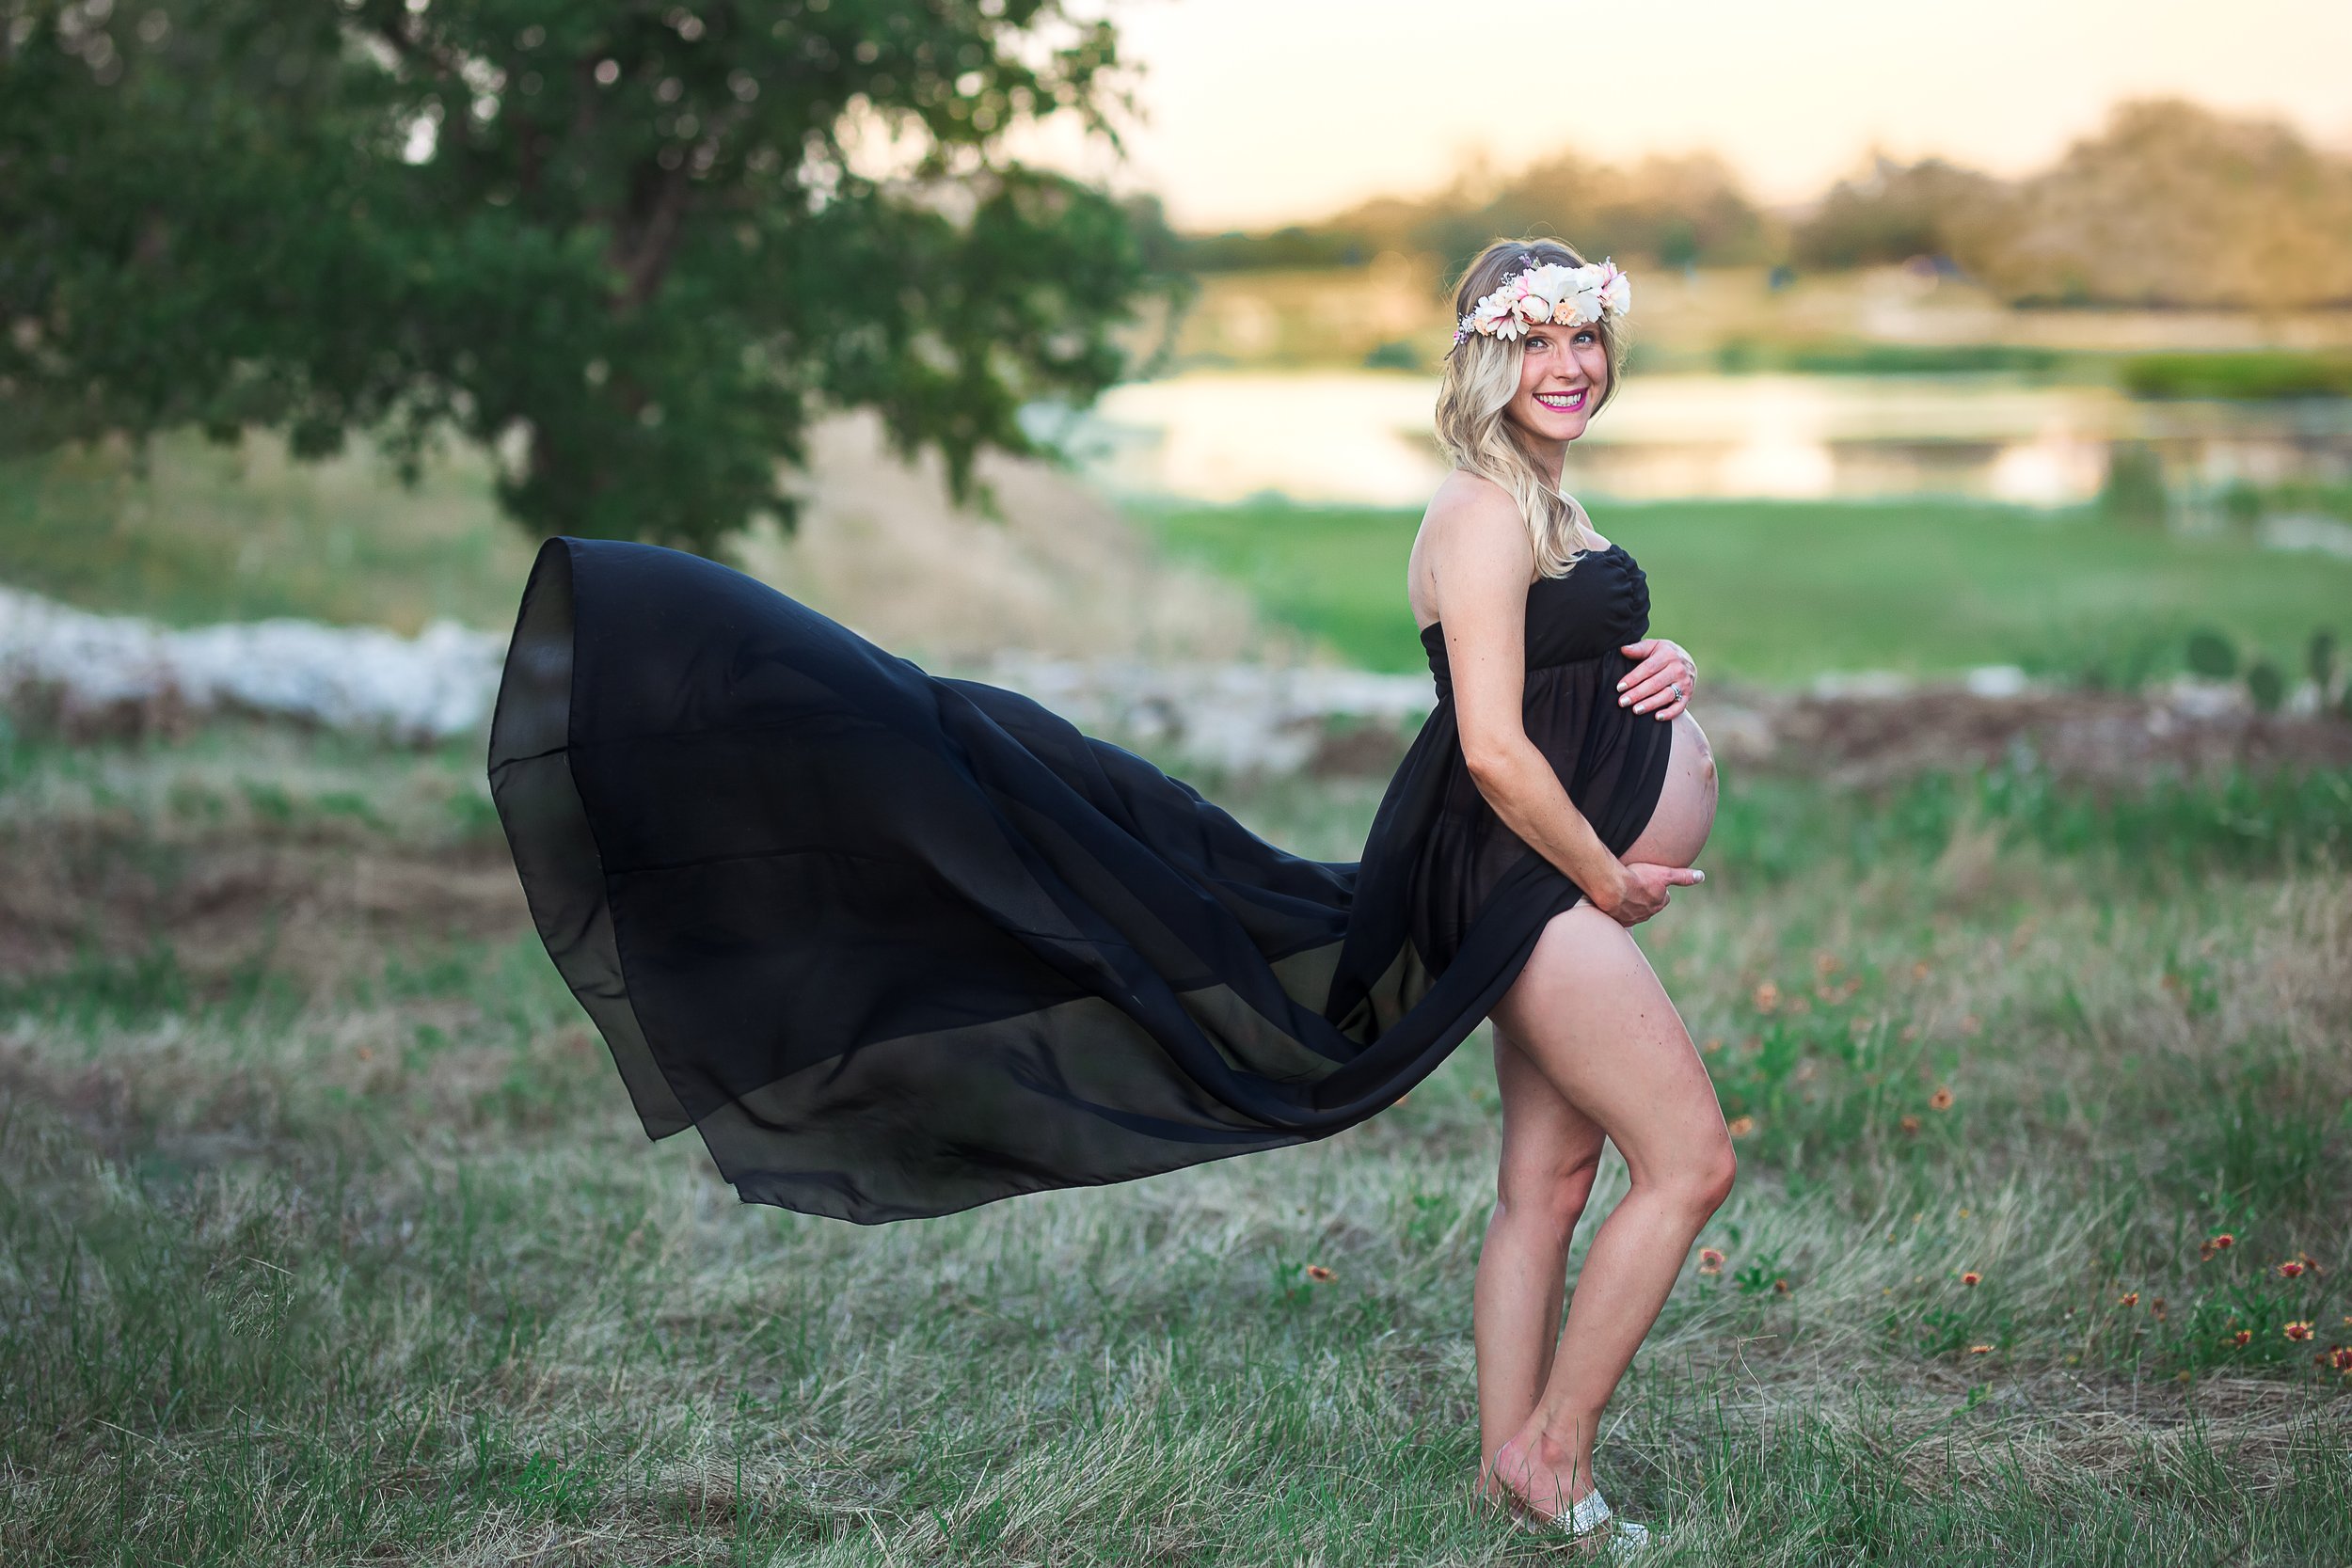  Pregnant woman with black dress blowing in the wind 